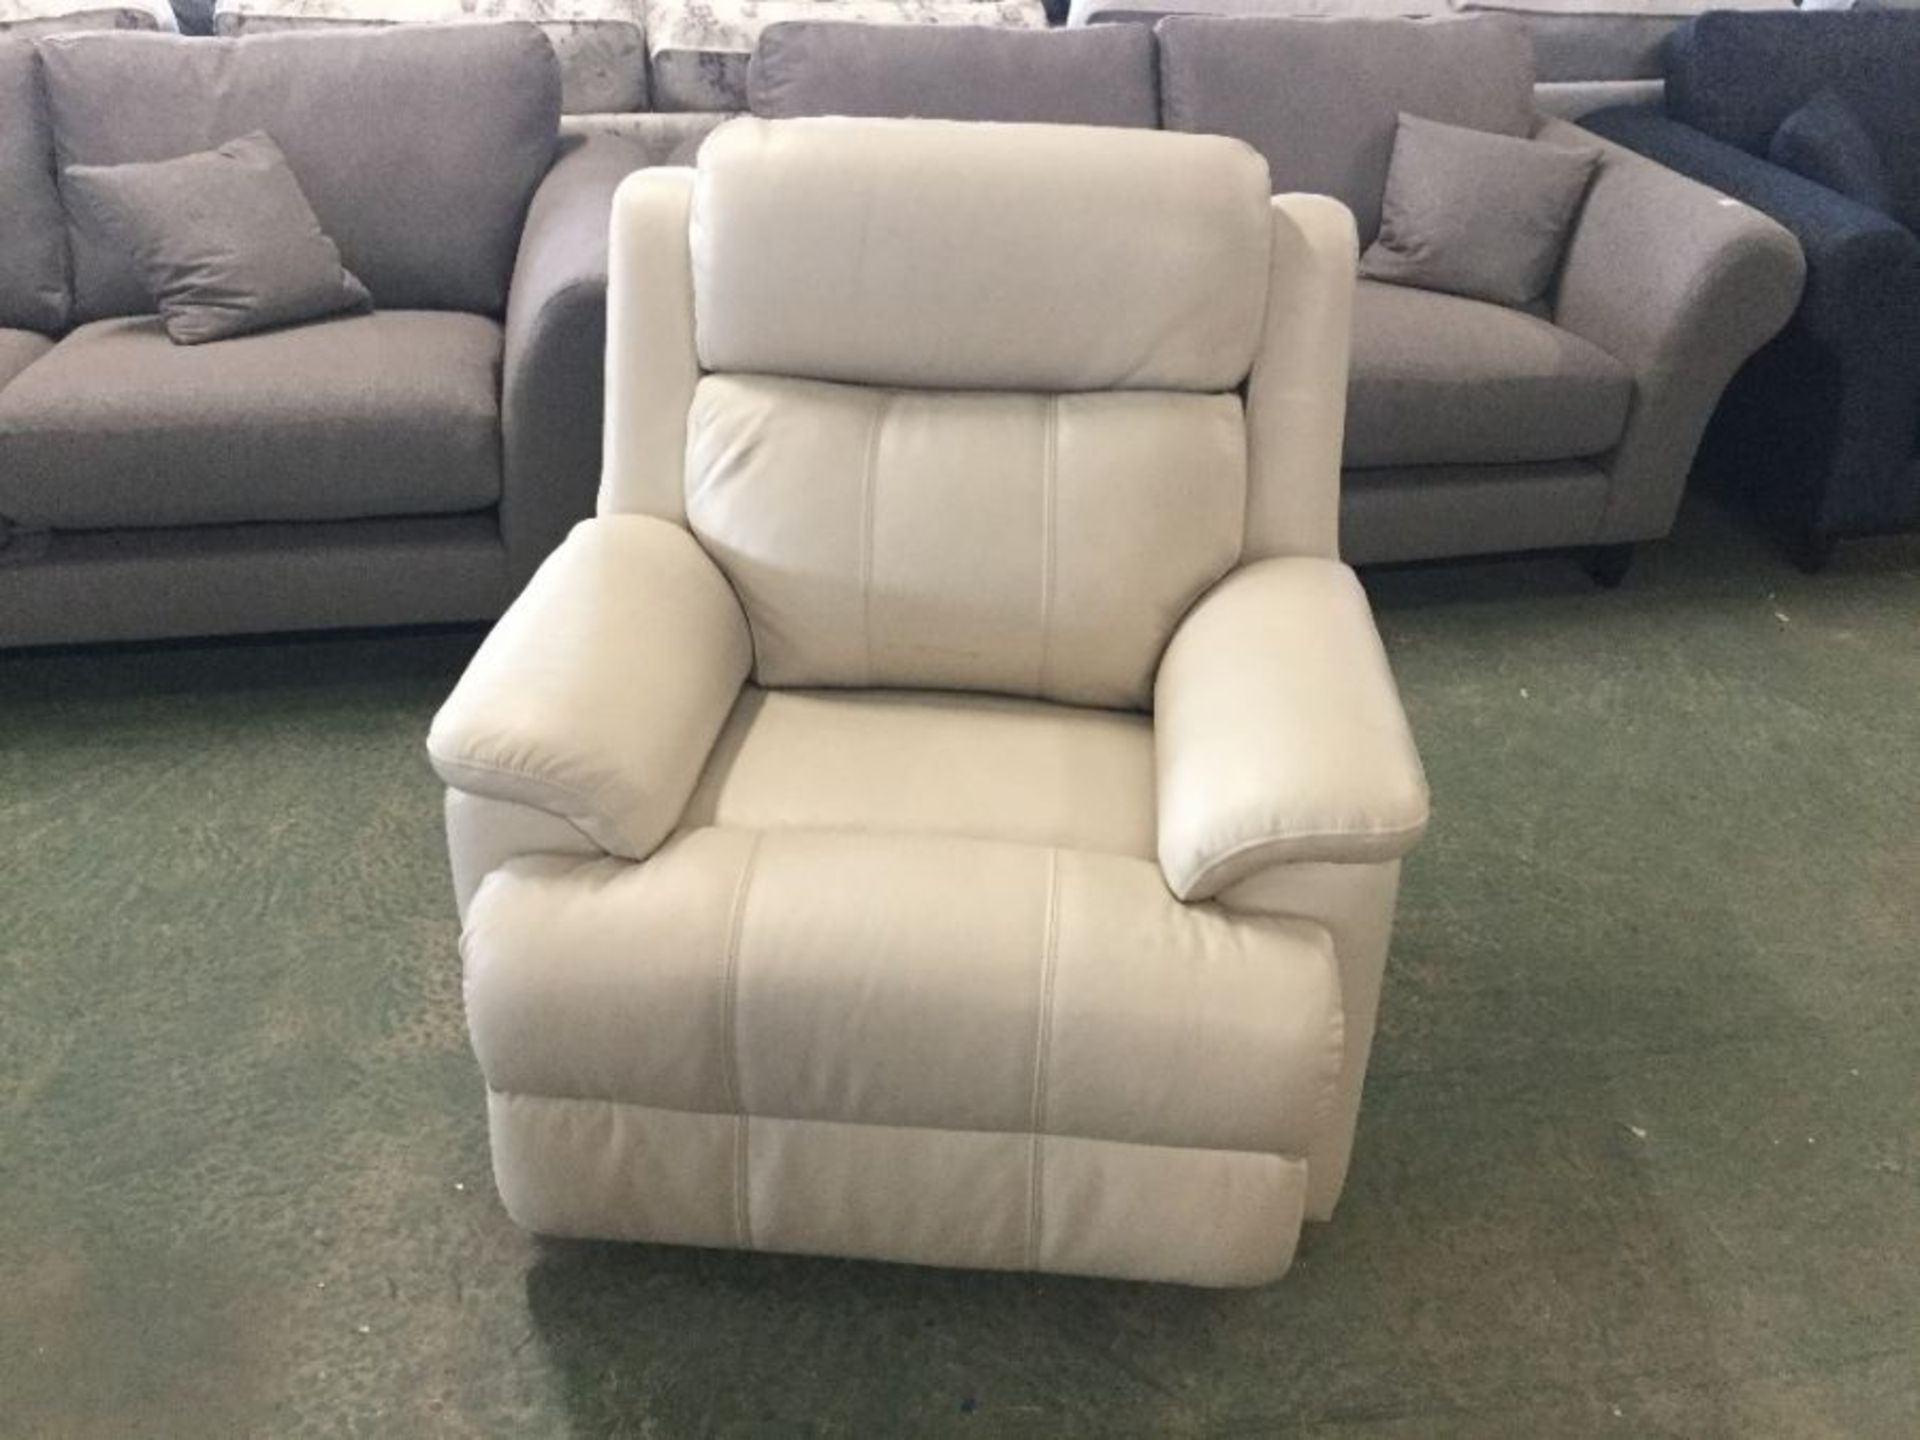 GRACEY CREAM ELECTRIC RECLINING CHAIR (S1-23)